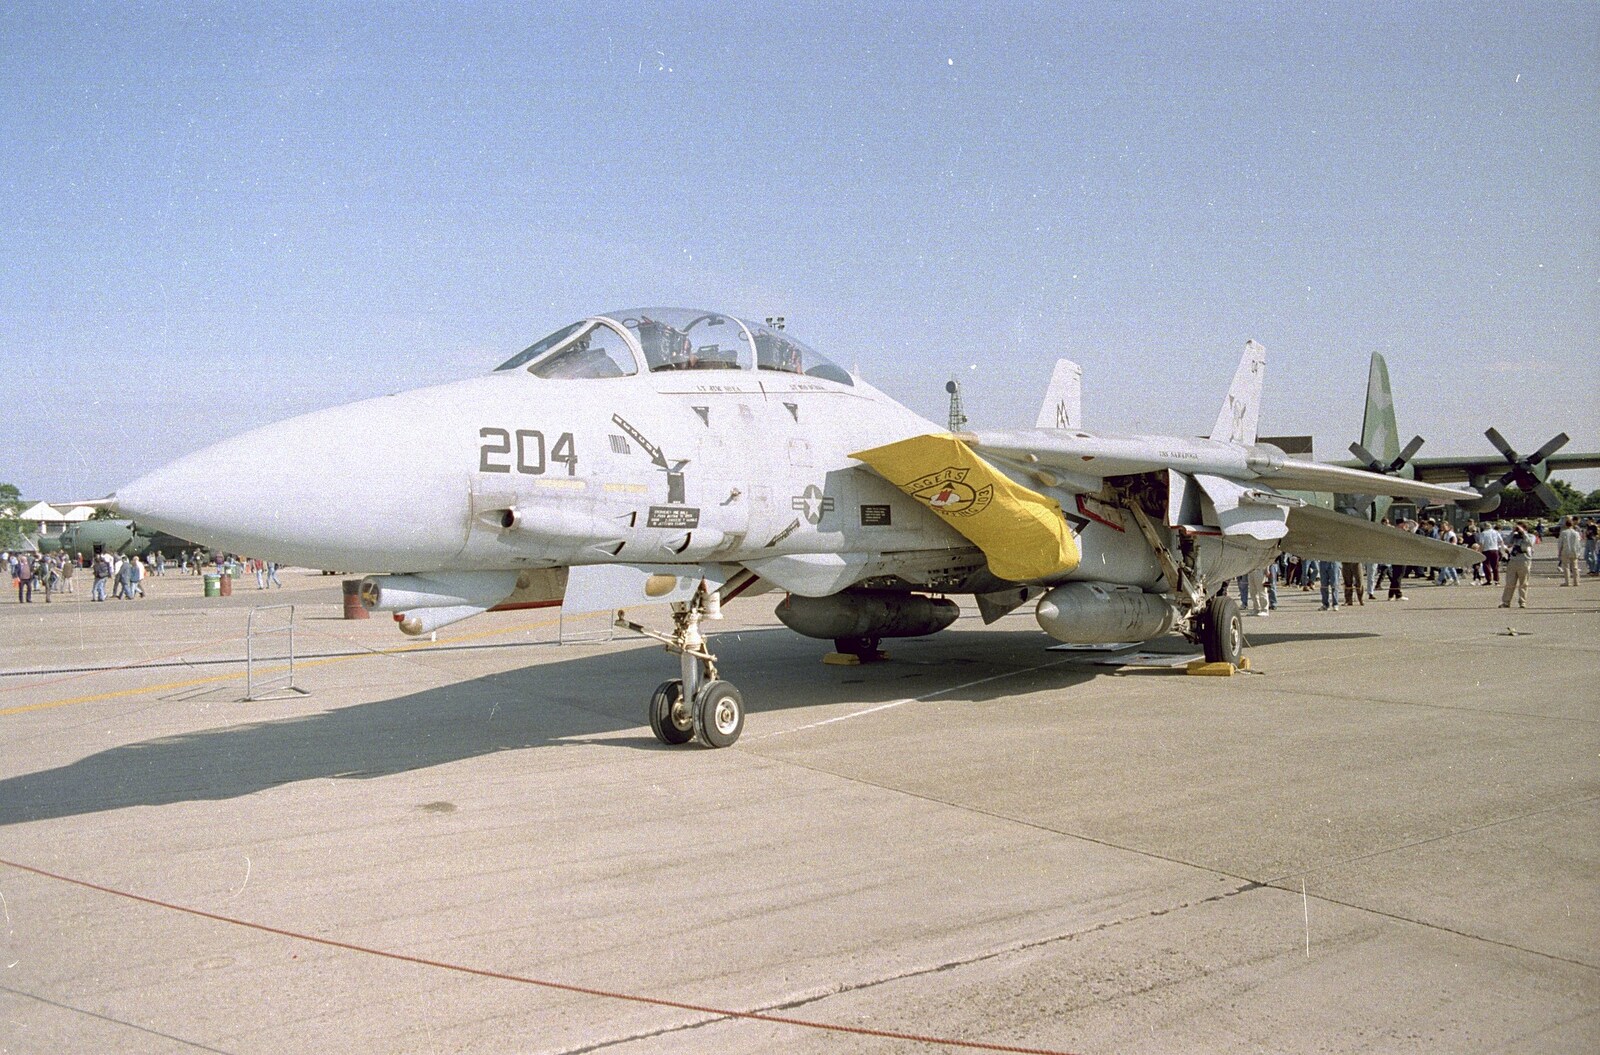 F14 Tomcat (?) from The Mildenhall Air Fete, Mildenhall, Suffolk - 29th May 1994